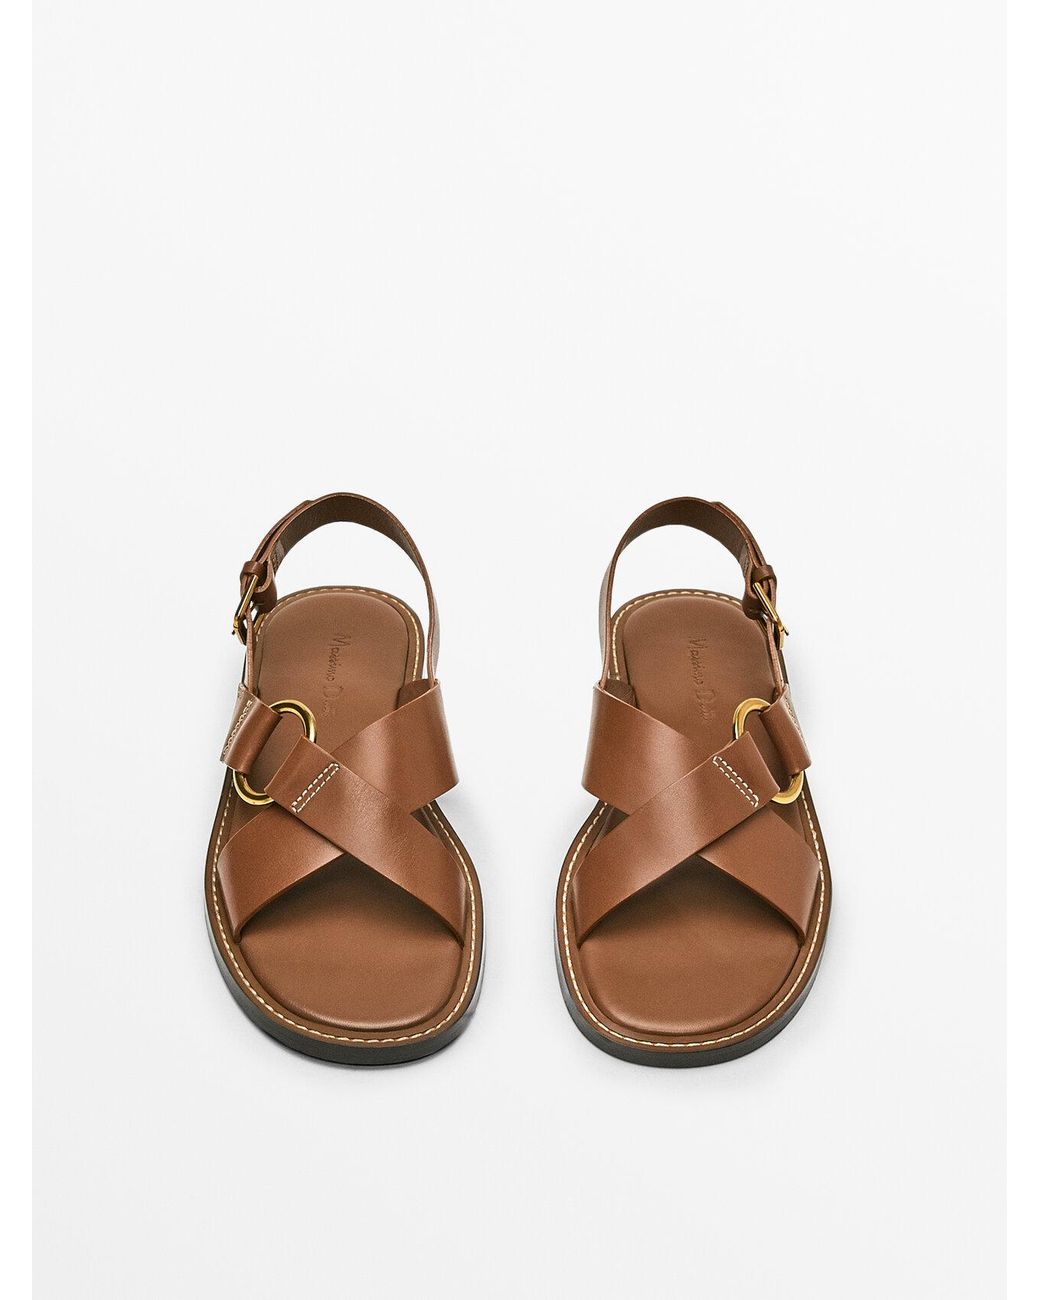 MASSIMO DUTTI Leather Crossover Sandals in Brown | Lyst